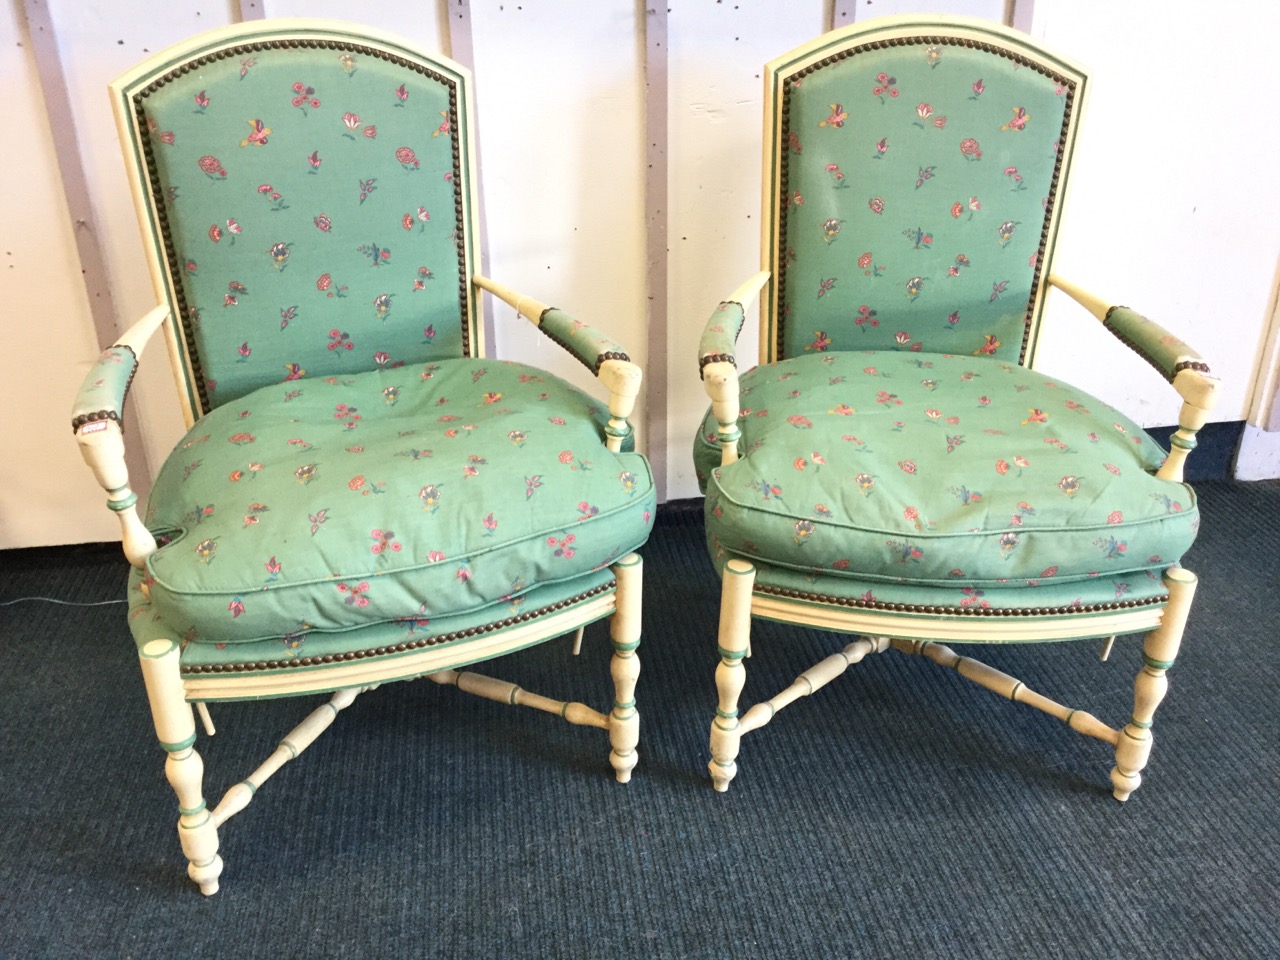 A pair of painted upholstered armchairs, the arched moulded backs with brass studding framing